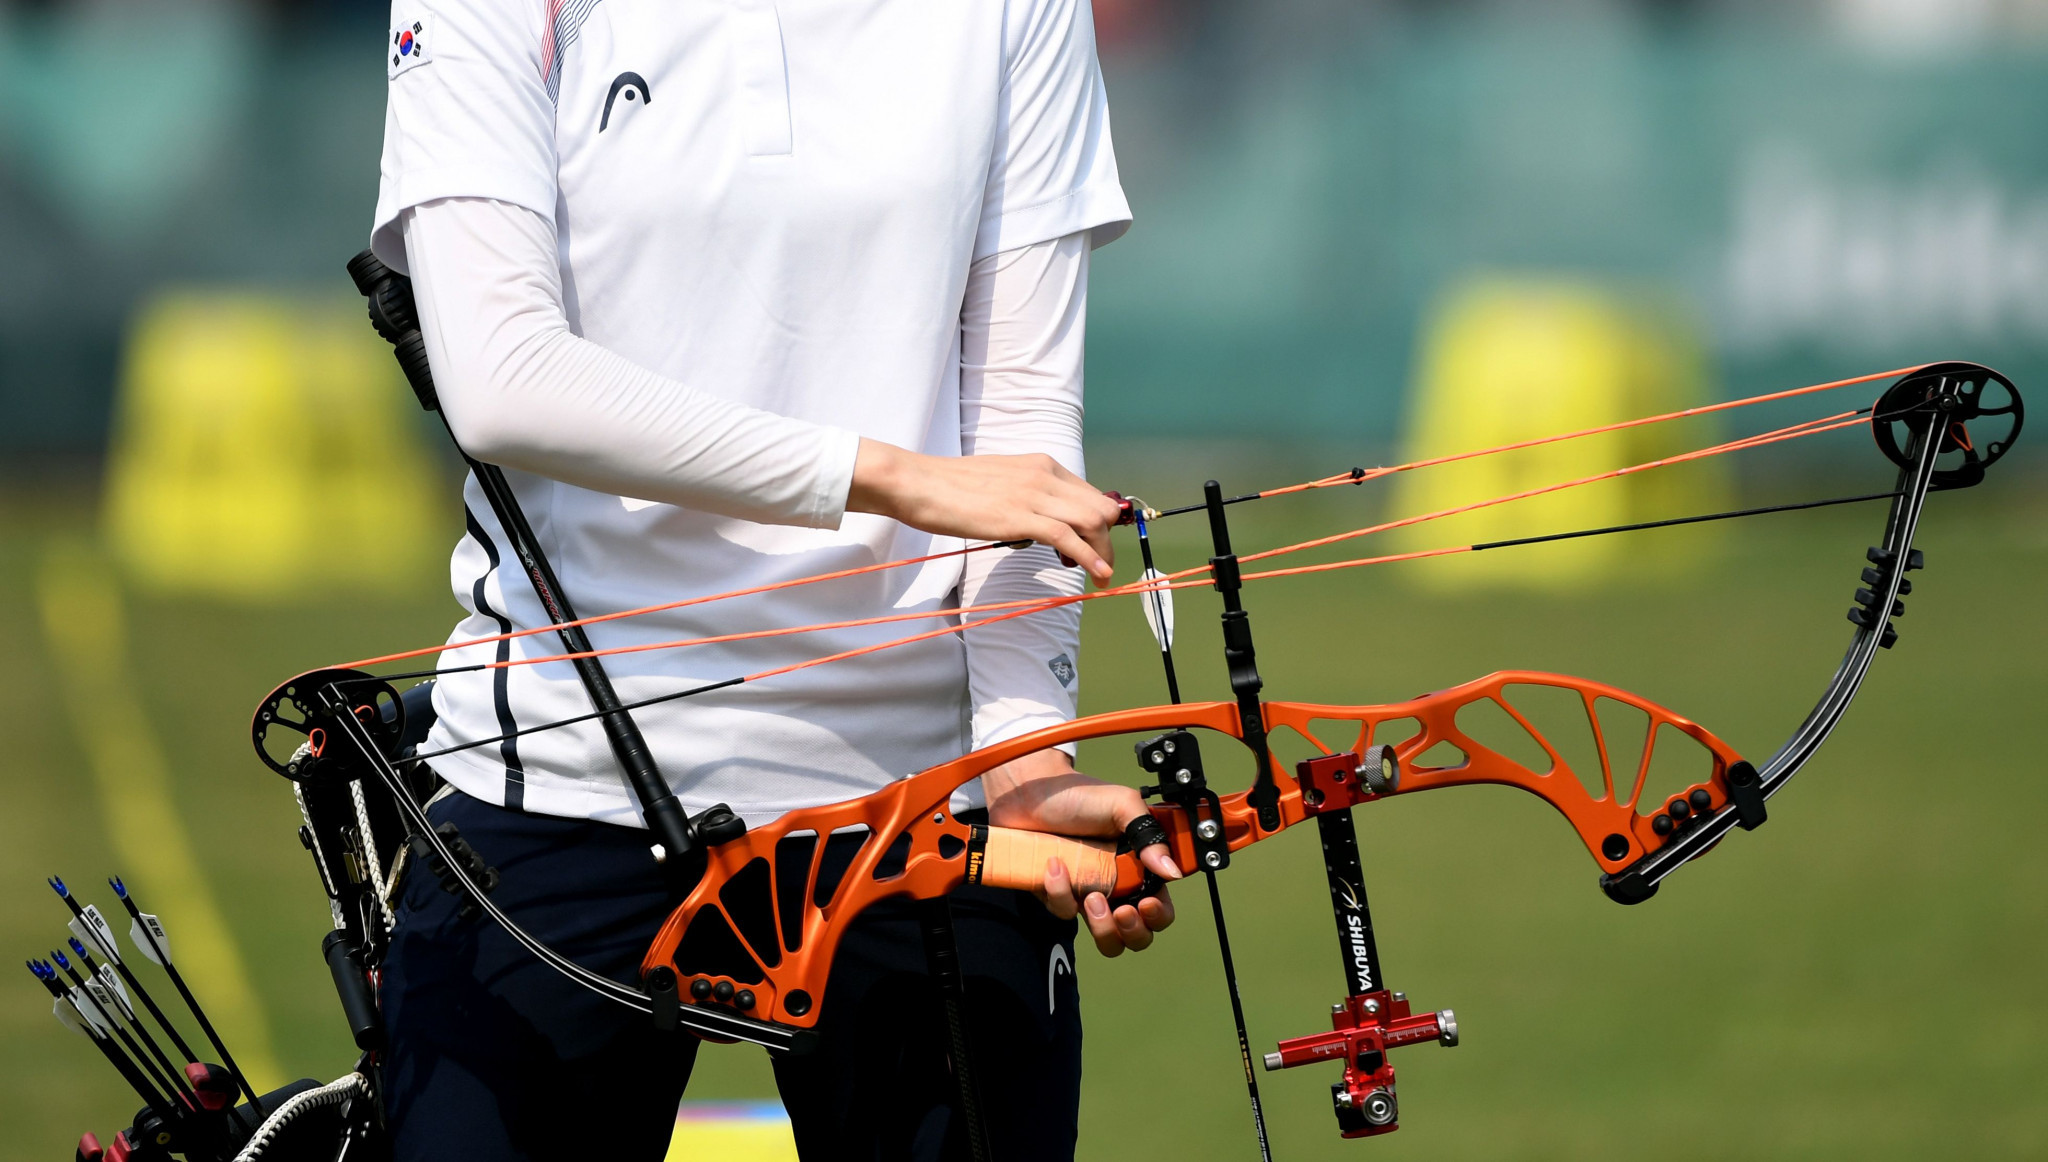 South Korea and India take first medals of Archery World Cup in Gwangju